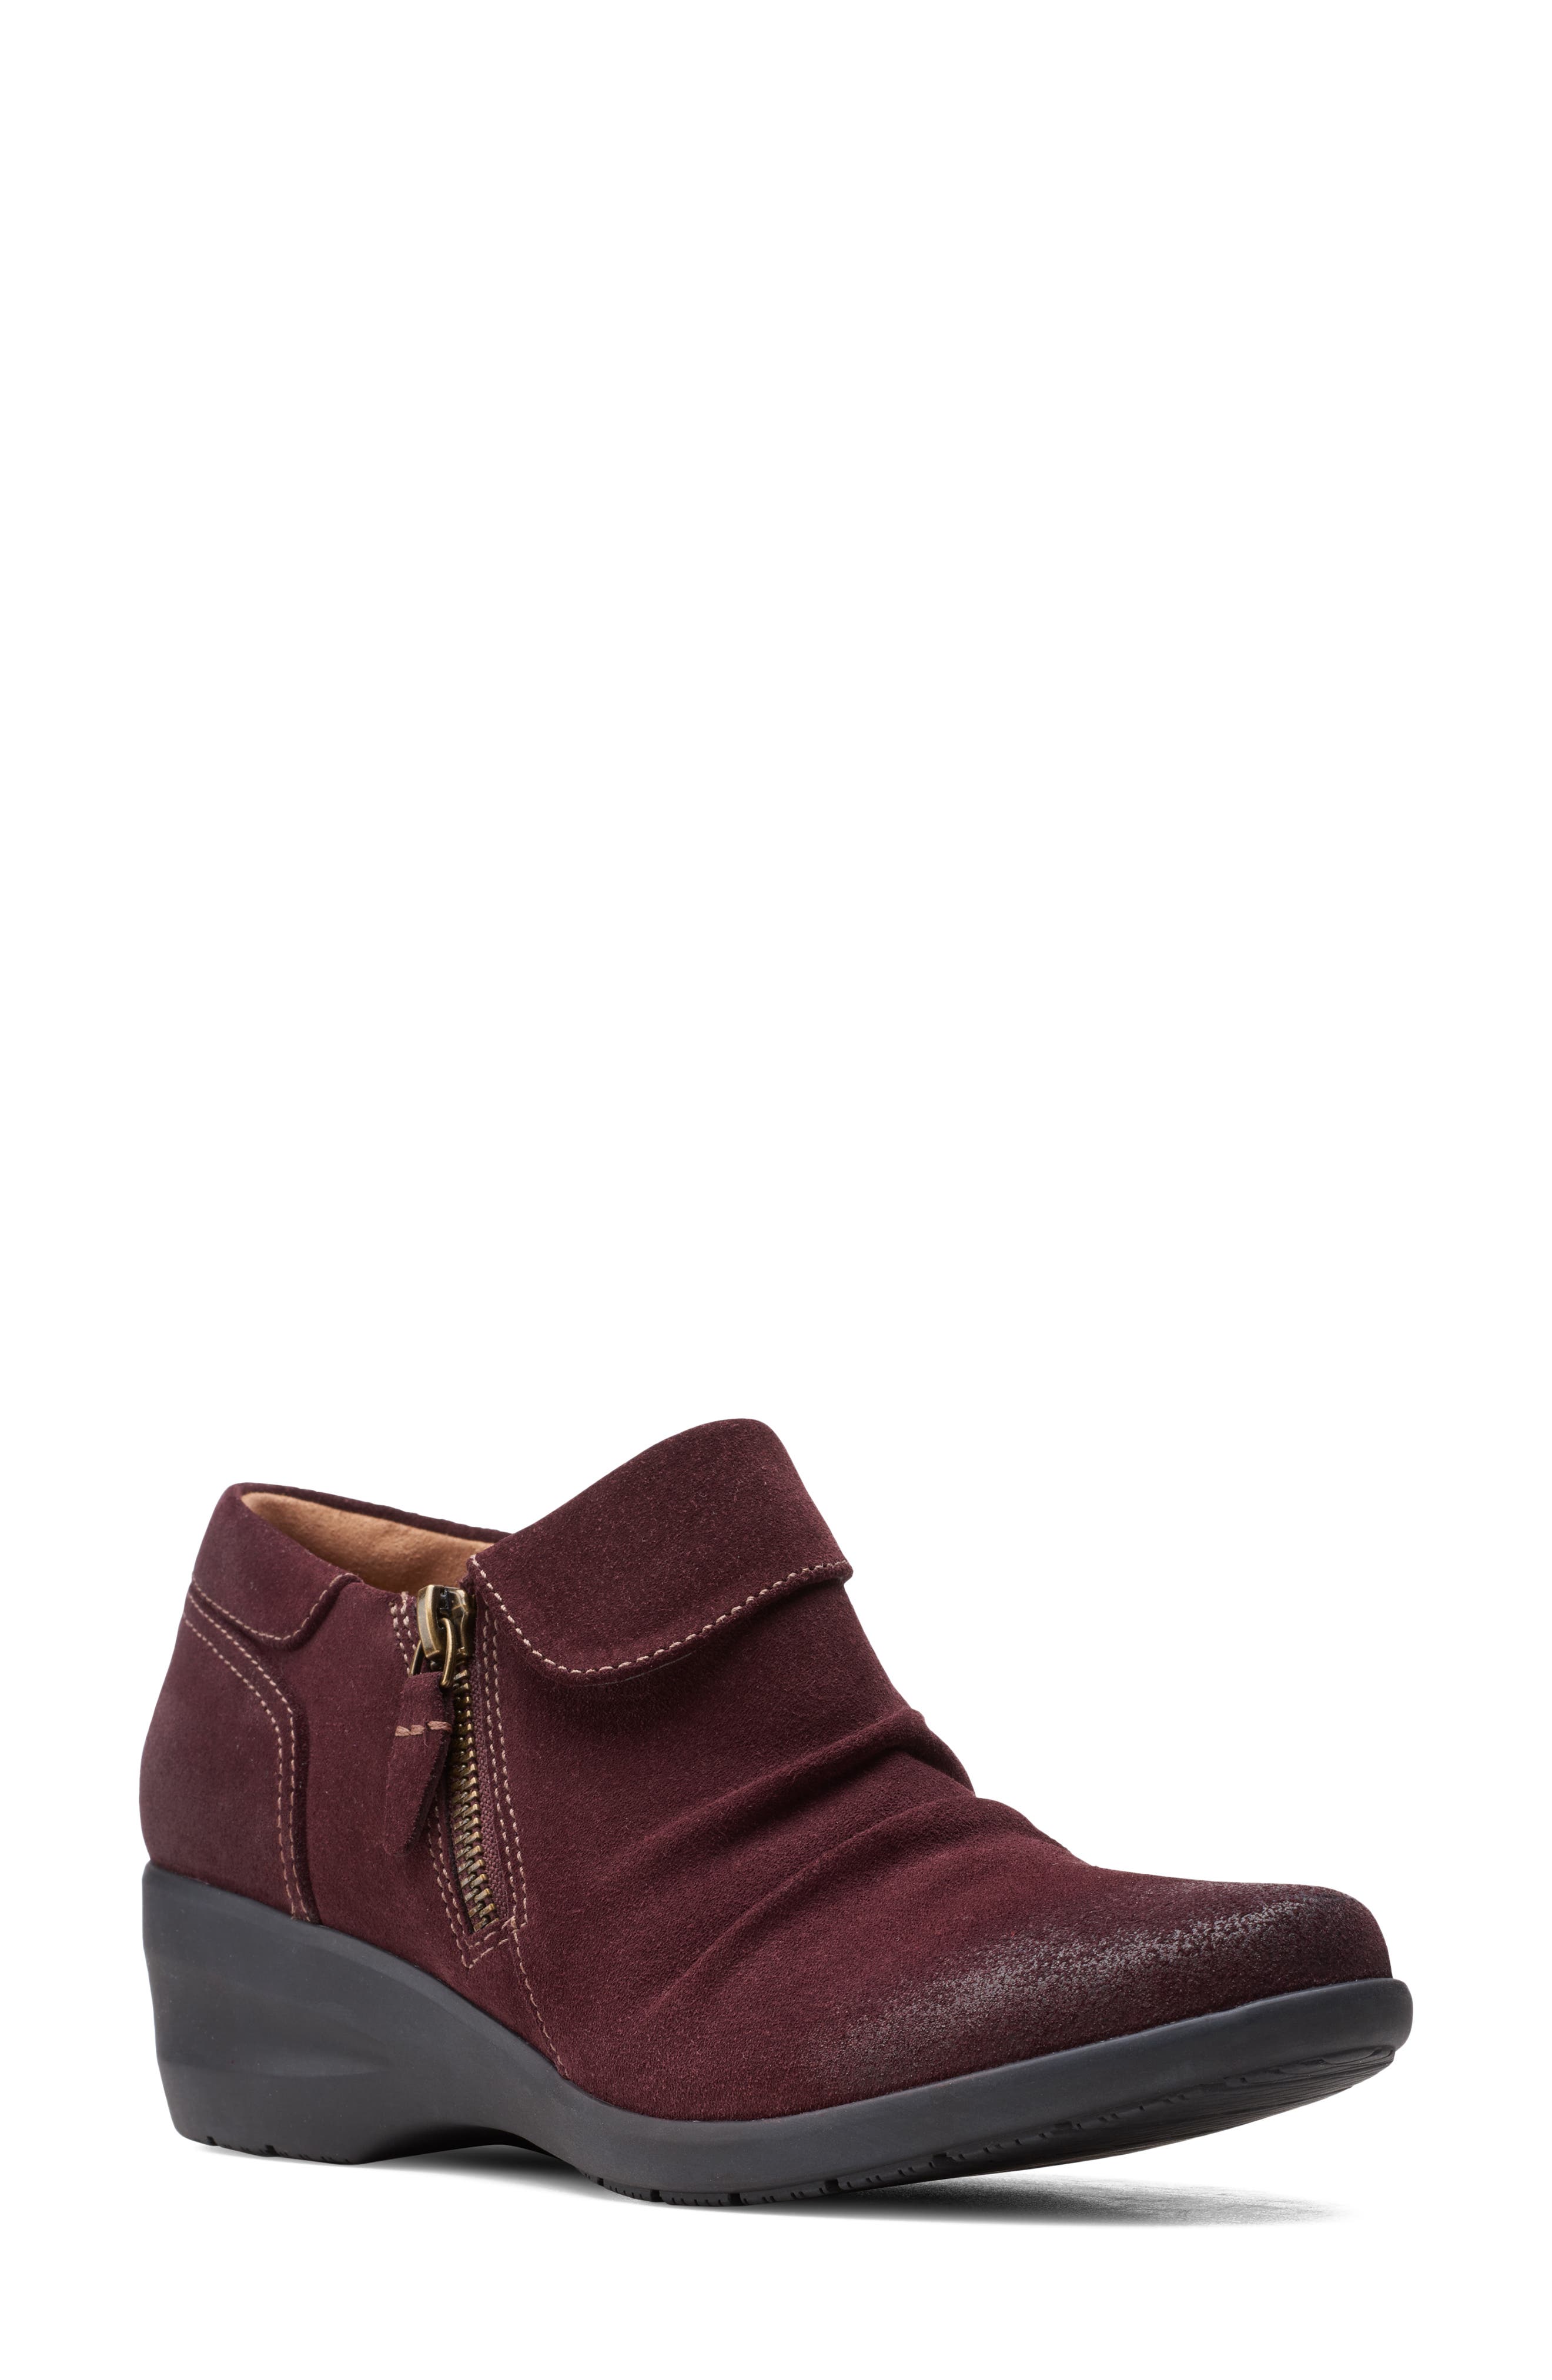 burgundy wide width shoes